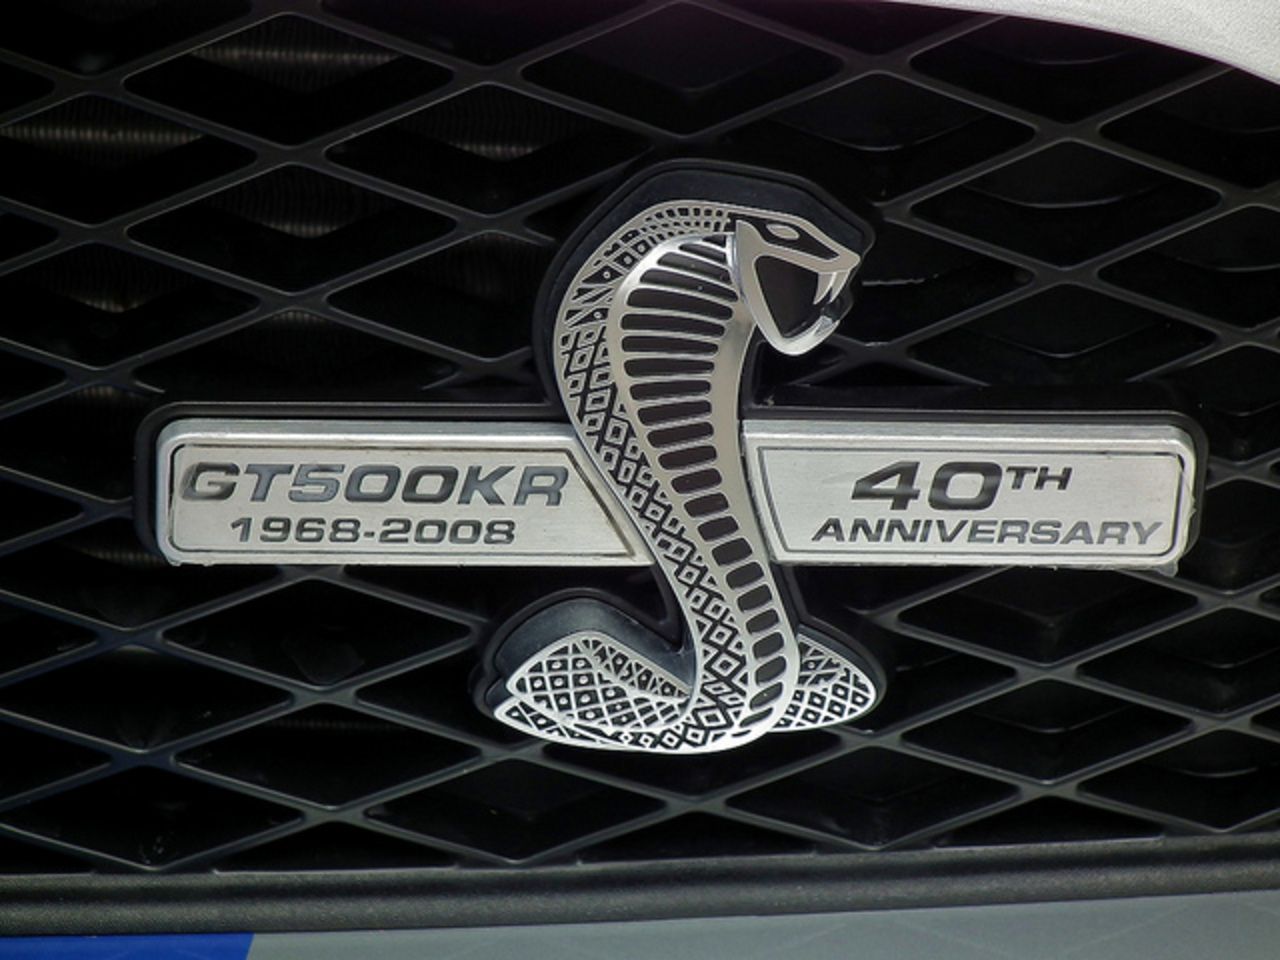 2008 Ford Mustang Shelby GT500KR 40th Anniversary coupe | Flickr ...